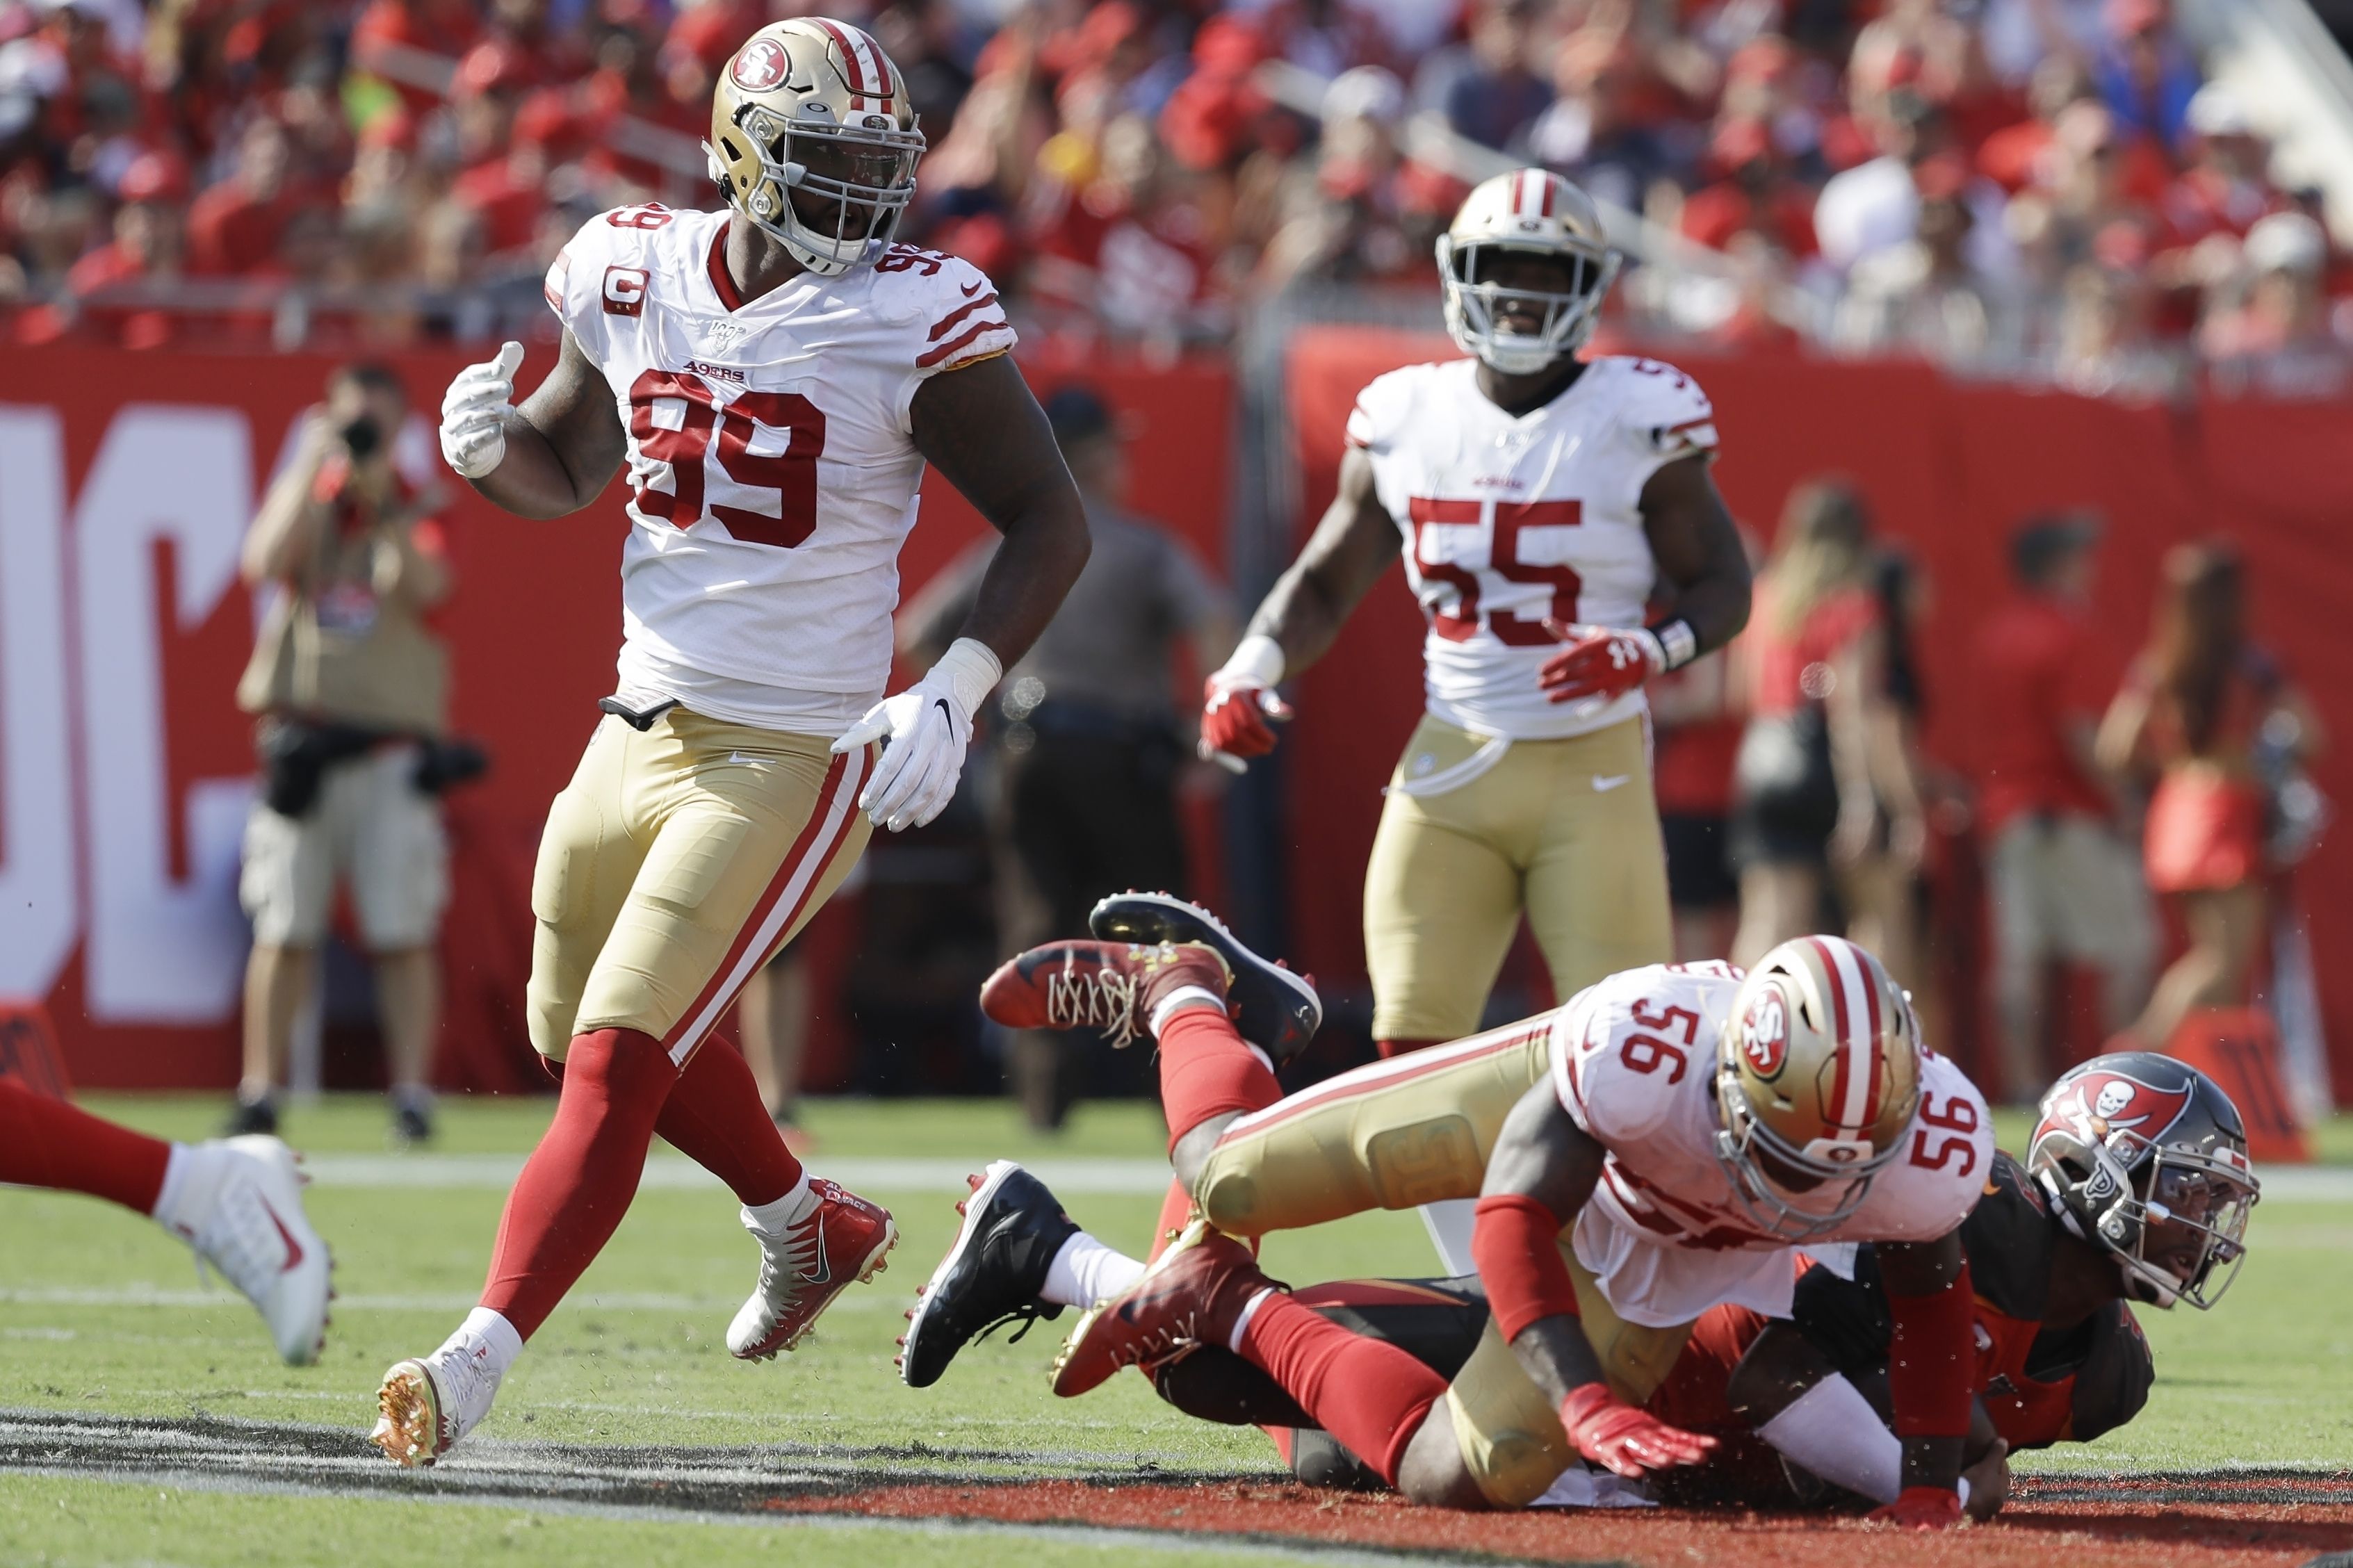 49ers Bucs: Kwon Alexander Ejected From Game After Illegal Hit